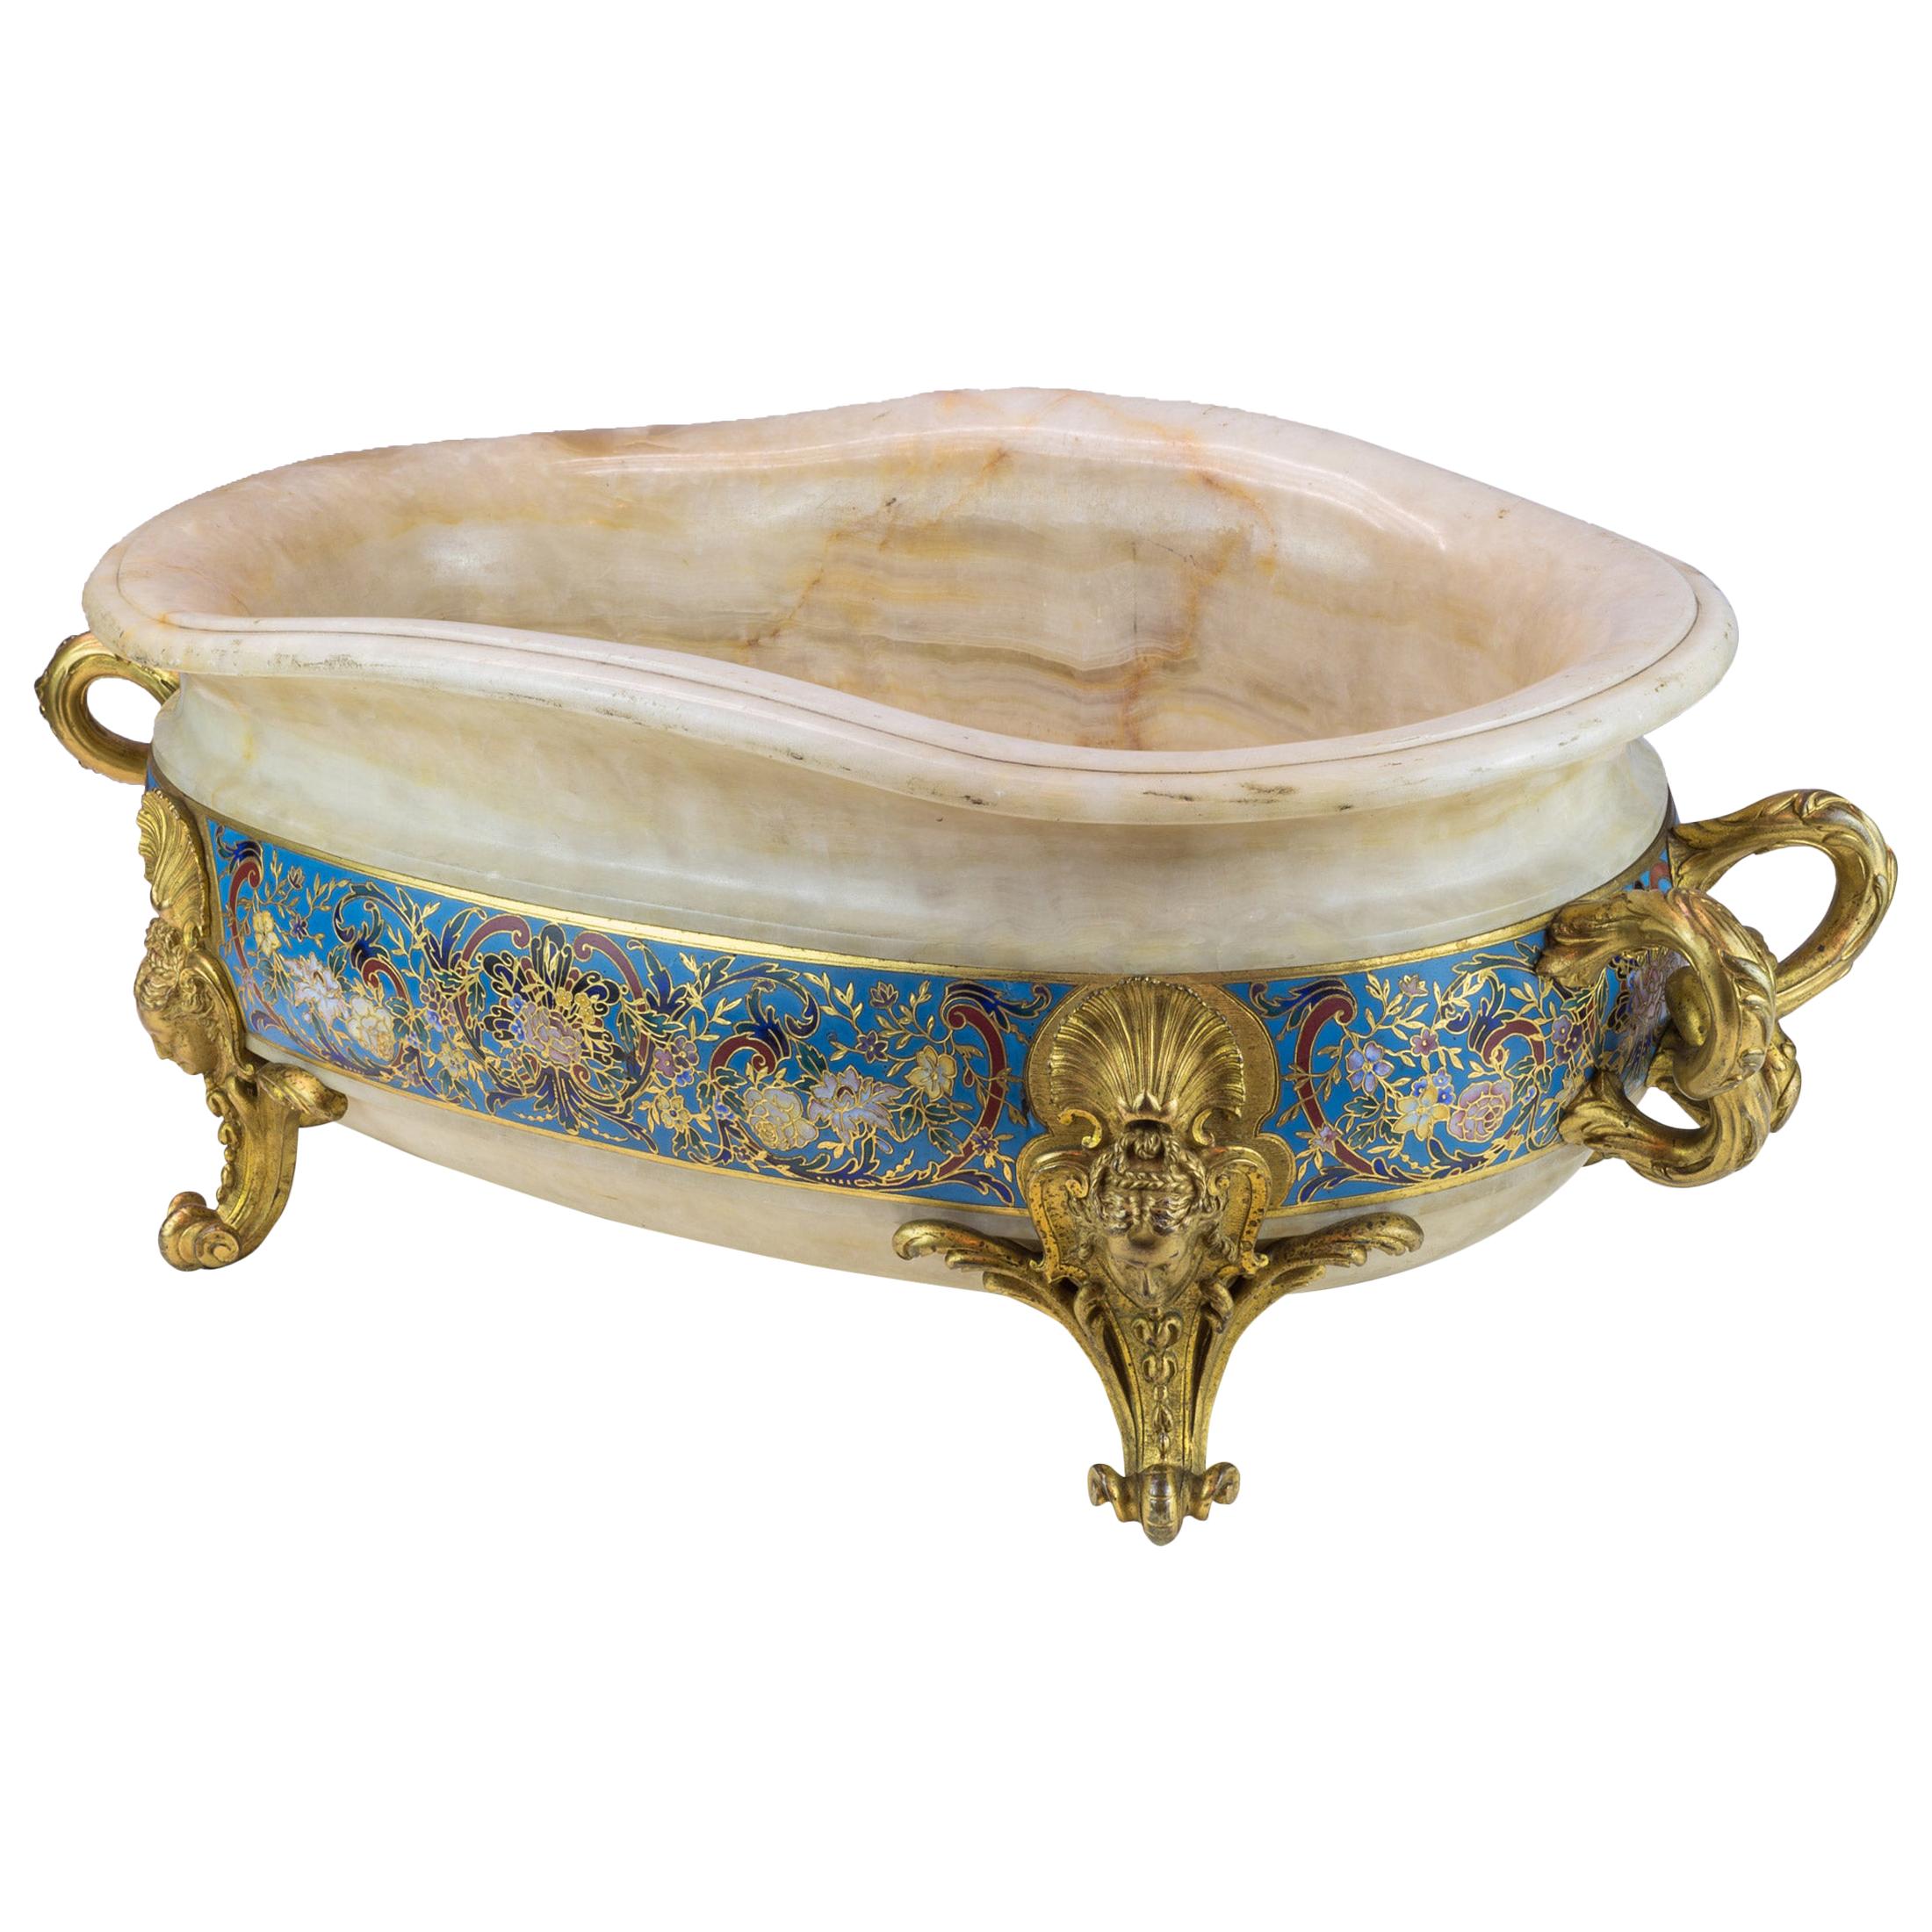 Ormolu-Mounted and Champlevé Enamel Decorated Onyx Jardinière by Barbedienne